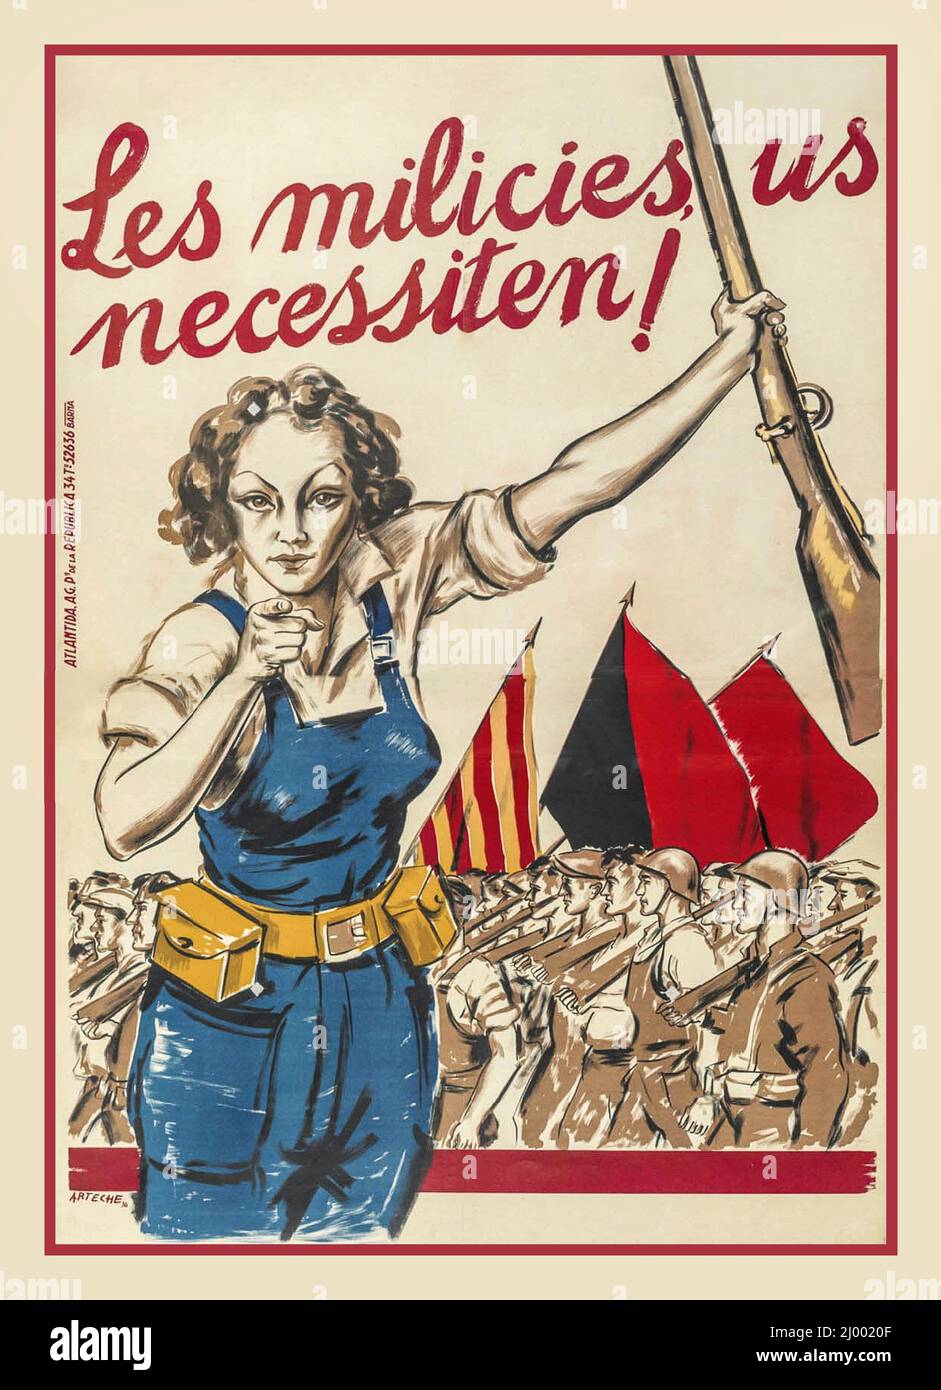 Spanish Civil War Propaganda Recruitment Appeal Poster 'The Militia Needs You!', Spanish Republican Poster for Civil War represented by working class Spanish people fighting against the combined forces of General Franco, Mussolini and Hitler  (1936) Stock Photo